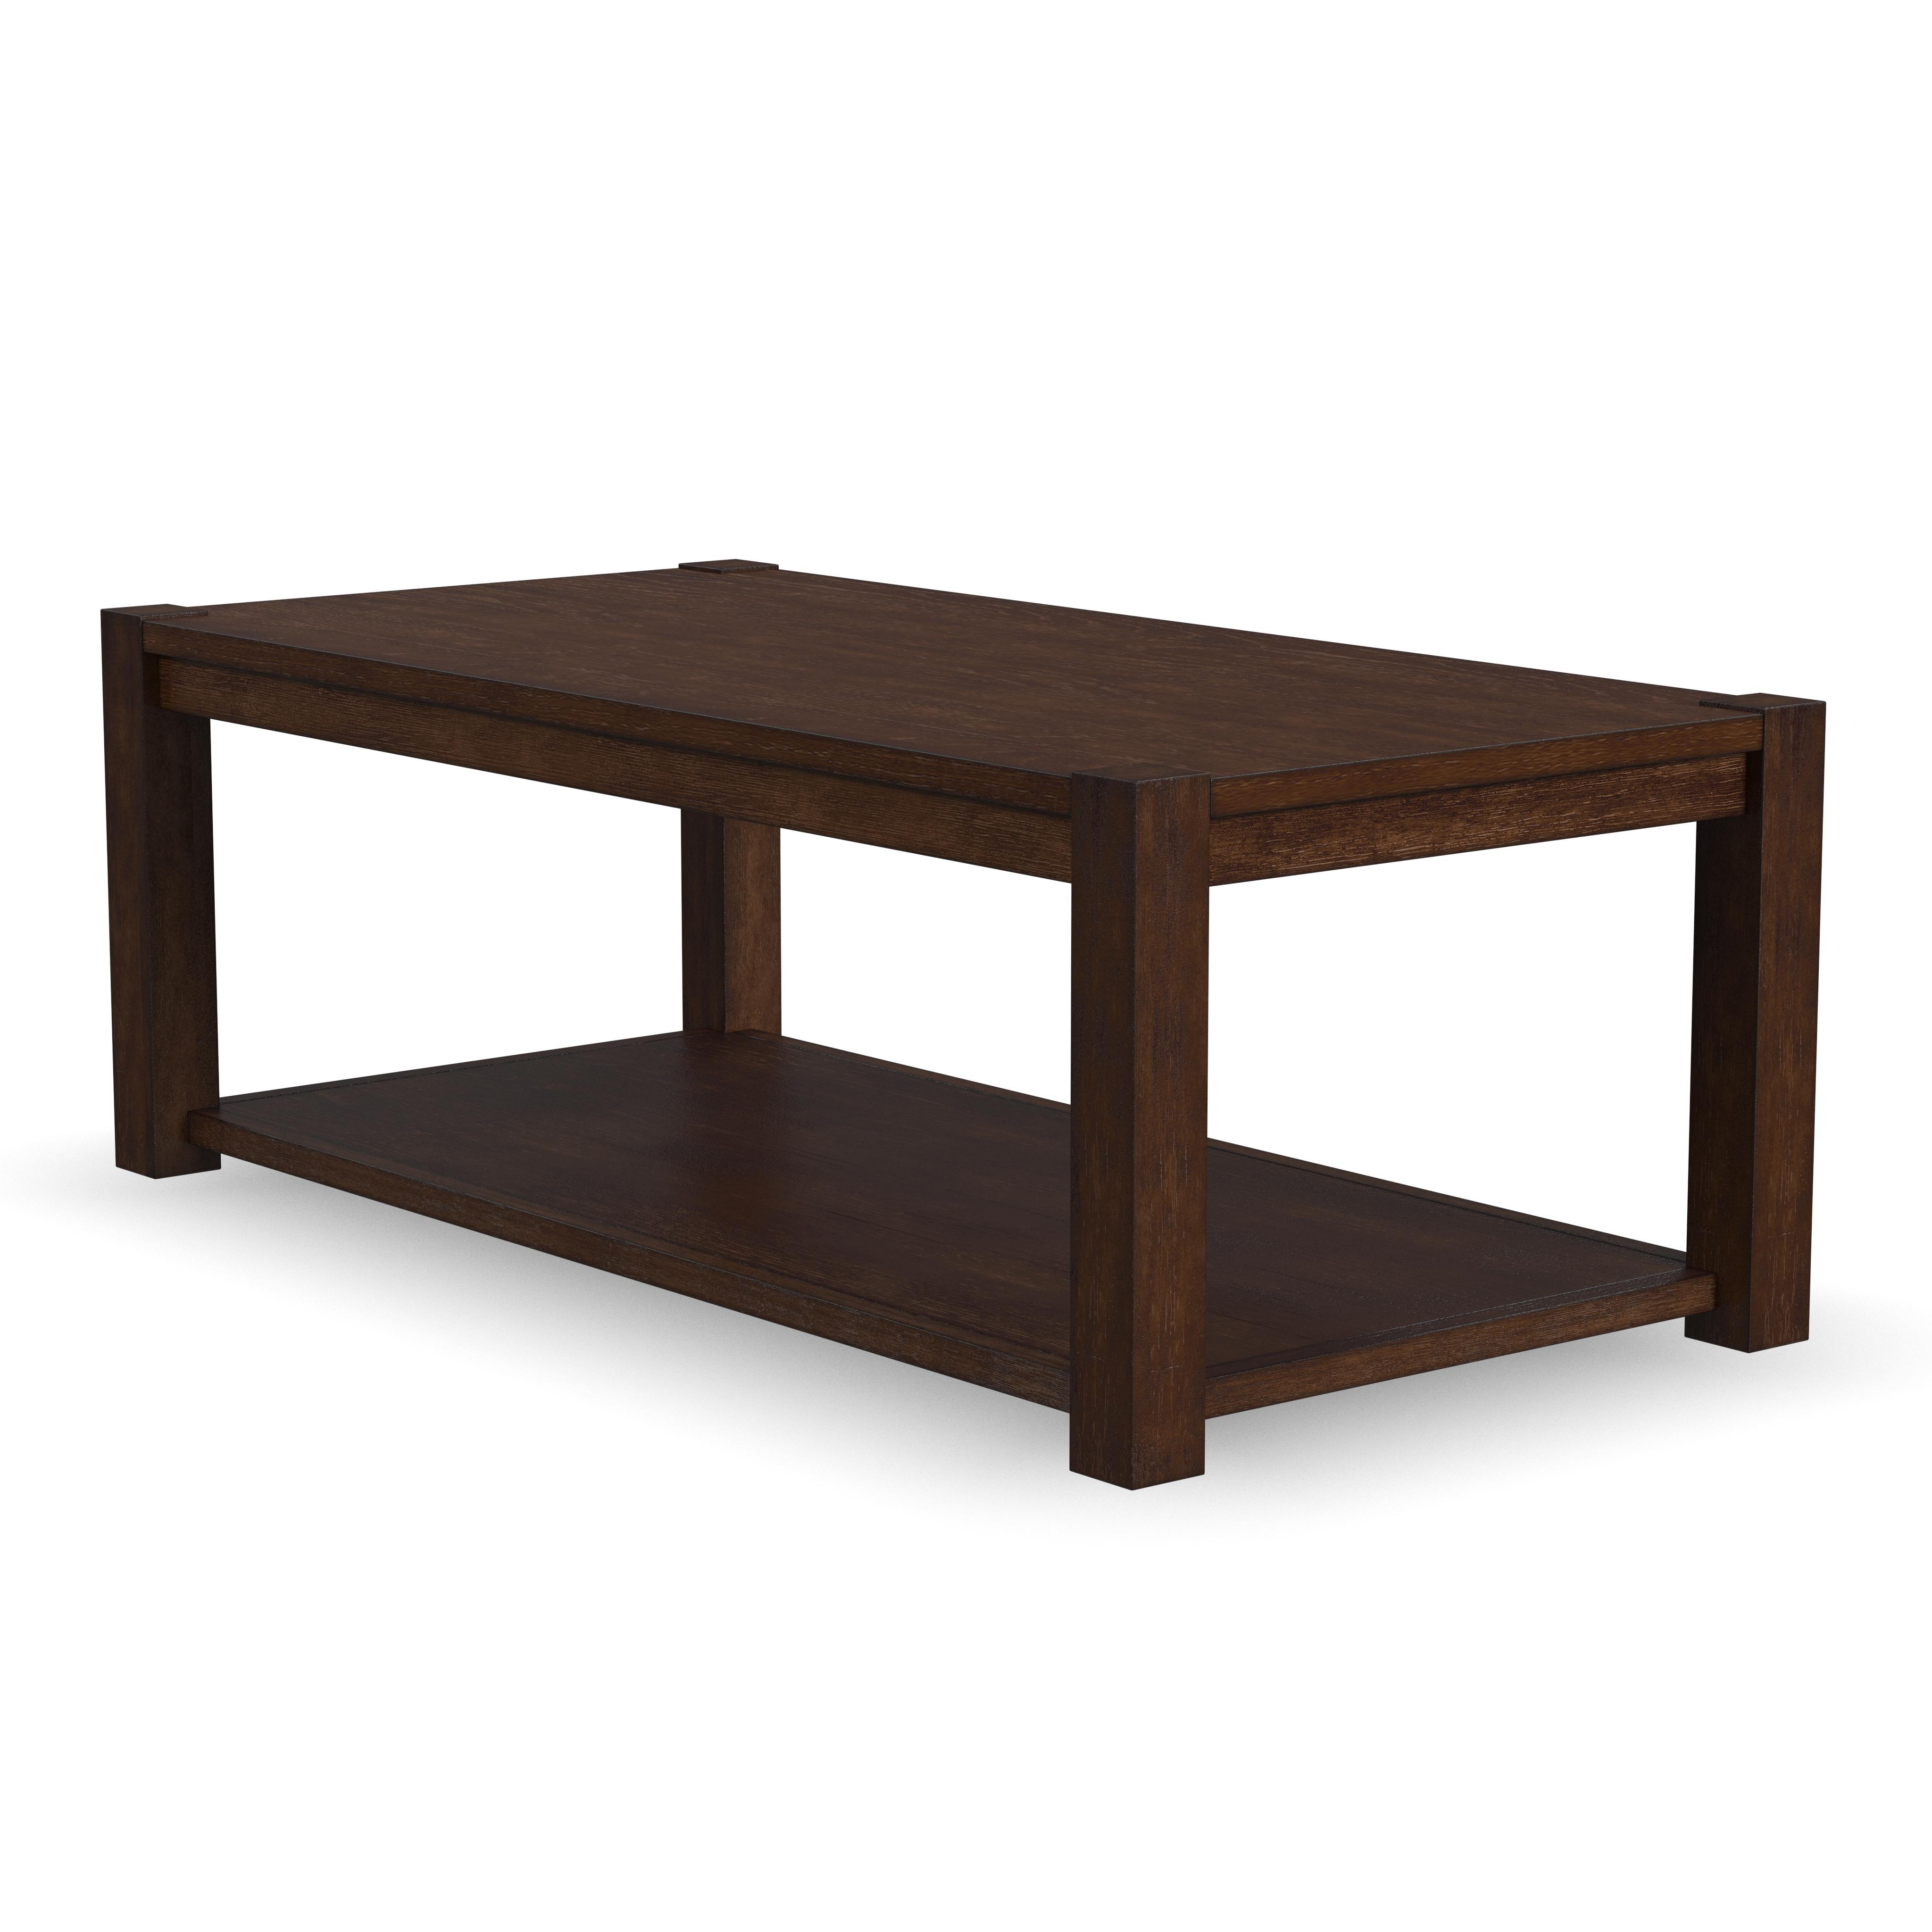 Flexsteel Boulder Rectangular Coffee Table with Casters